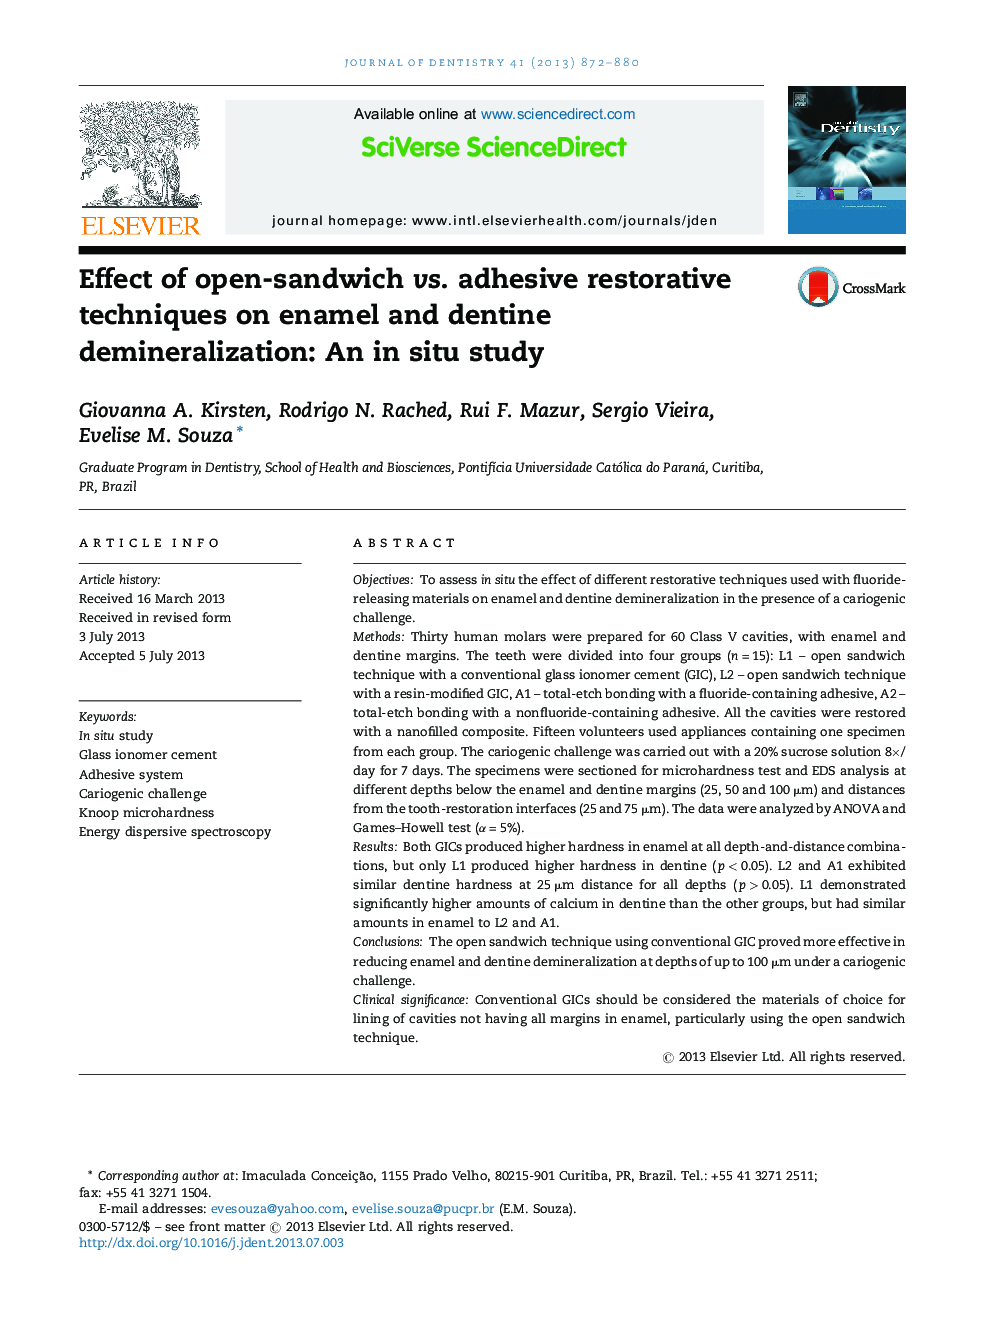 Effect of open-sandwich vs. adhesive restorative techniques on enamel and dentine demineralization: An in situ study